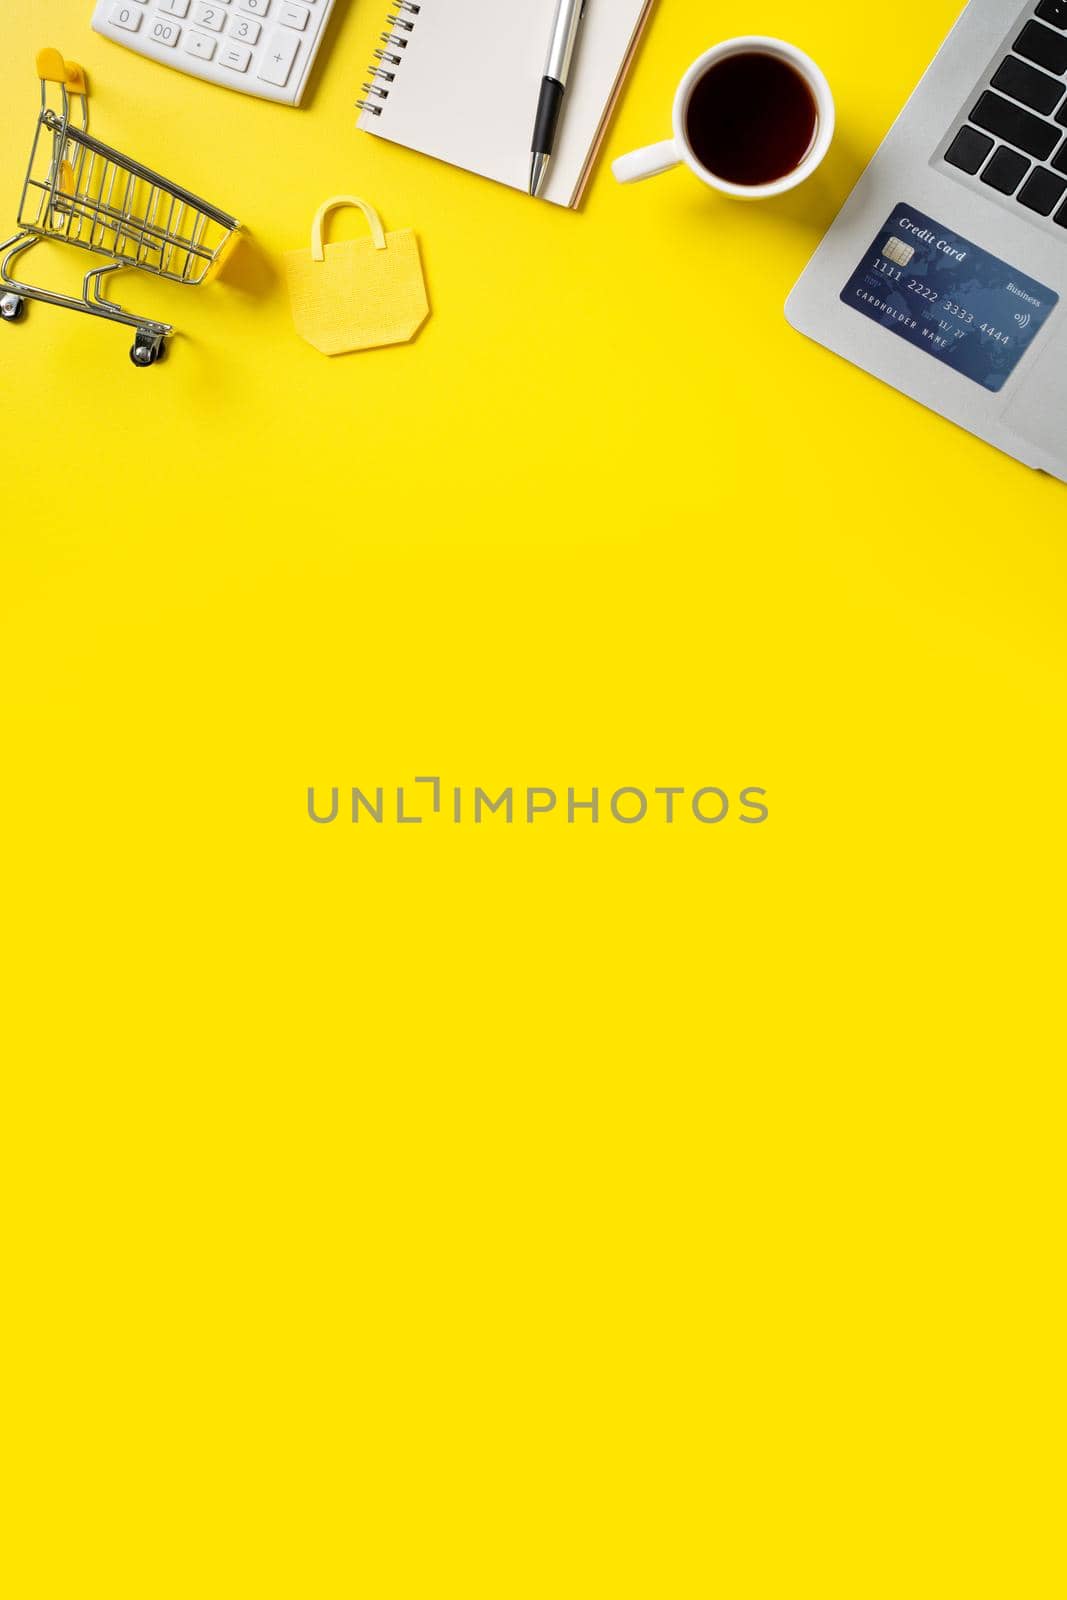 Online shopping concept. Top view of credit card purchase design concept with note, calculator and computer isolated on office yellow table background.